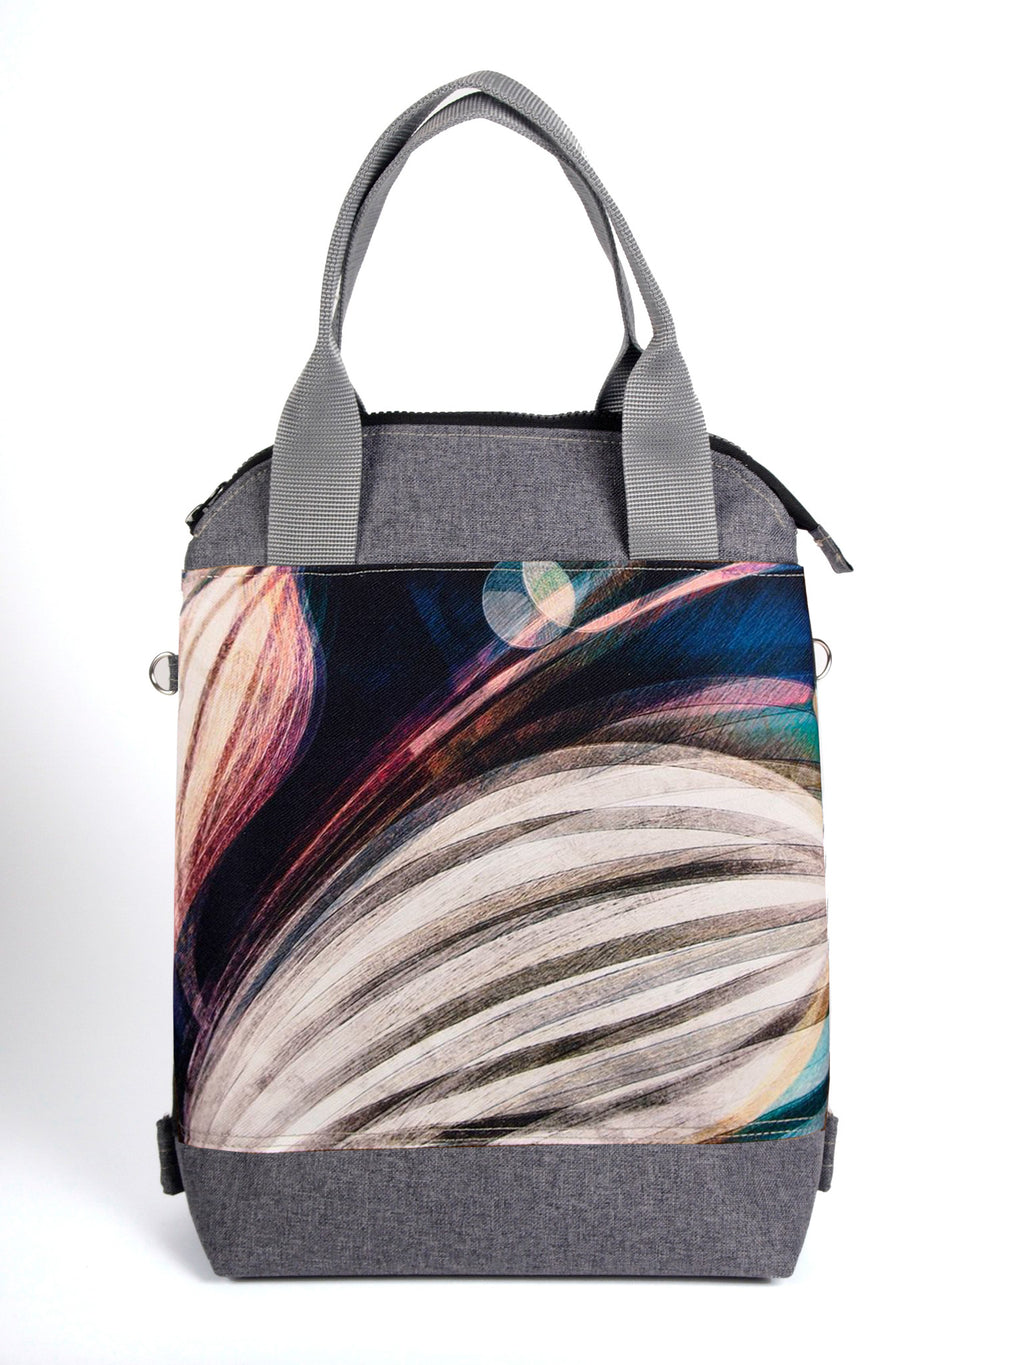 Bardo classic backpack textiles - Spring - Premium Textiles from BARDO ART WORKS - Just lvabstract, floral, handemade, leaves, tablet, urban style, woman, work bag89.00! Shop now at BARDO ART WORKS